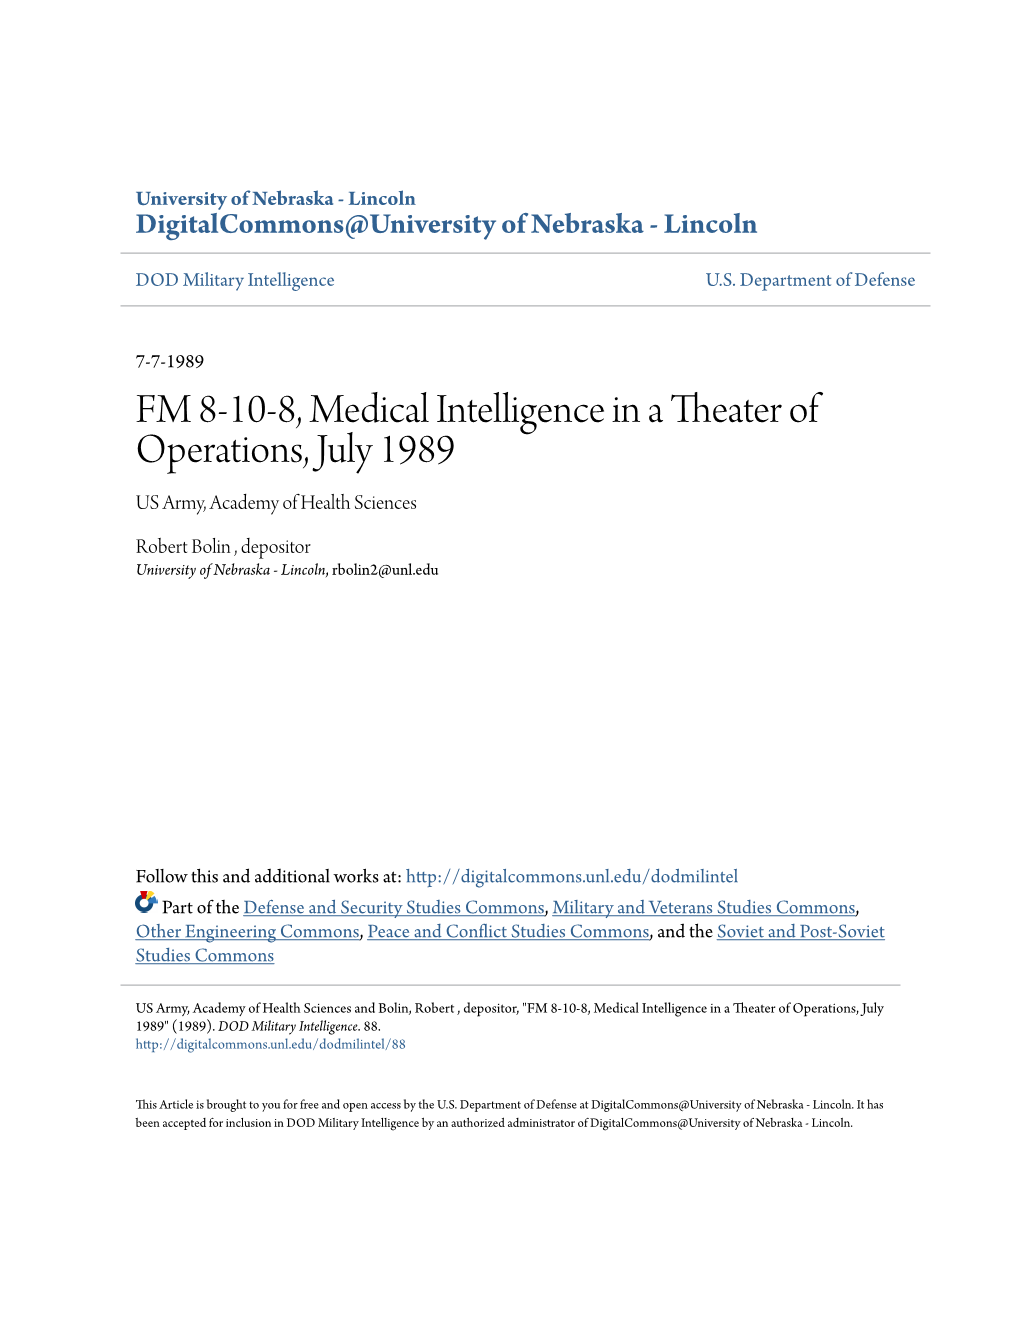 FM 8-10-8, Medical Intelligence in a Theater of Operations, July 1989 US Army, Academy of Health Sciences